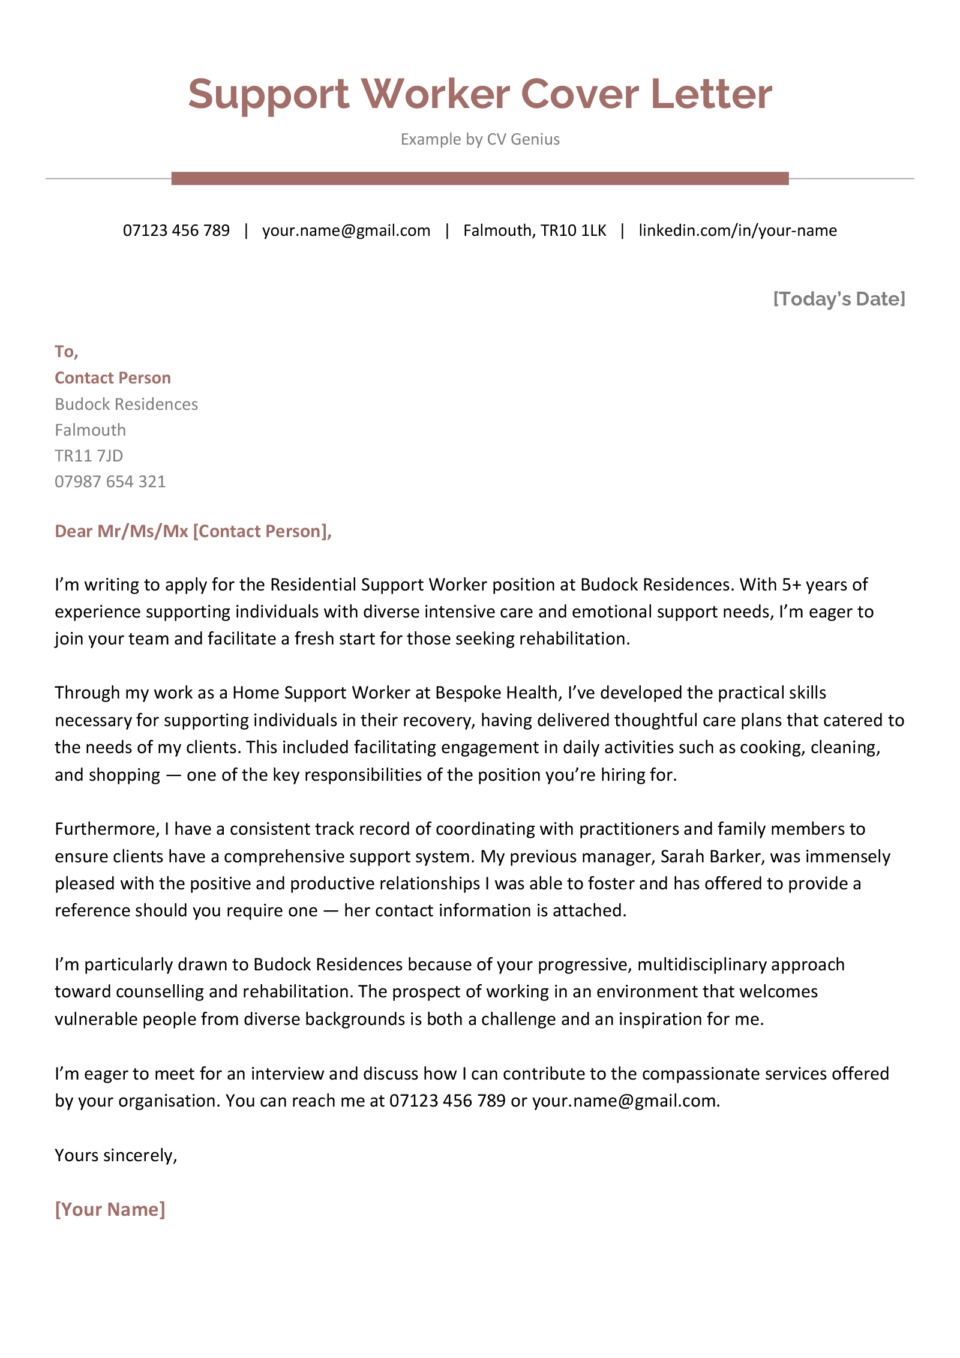 An example support worker cover letter with a maroon header and a few paragraphs of text outlining the applicant's skills and experience.